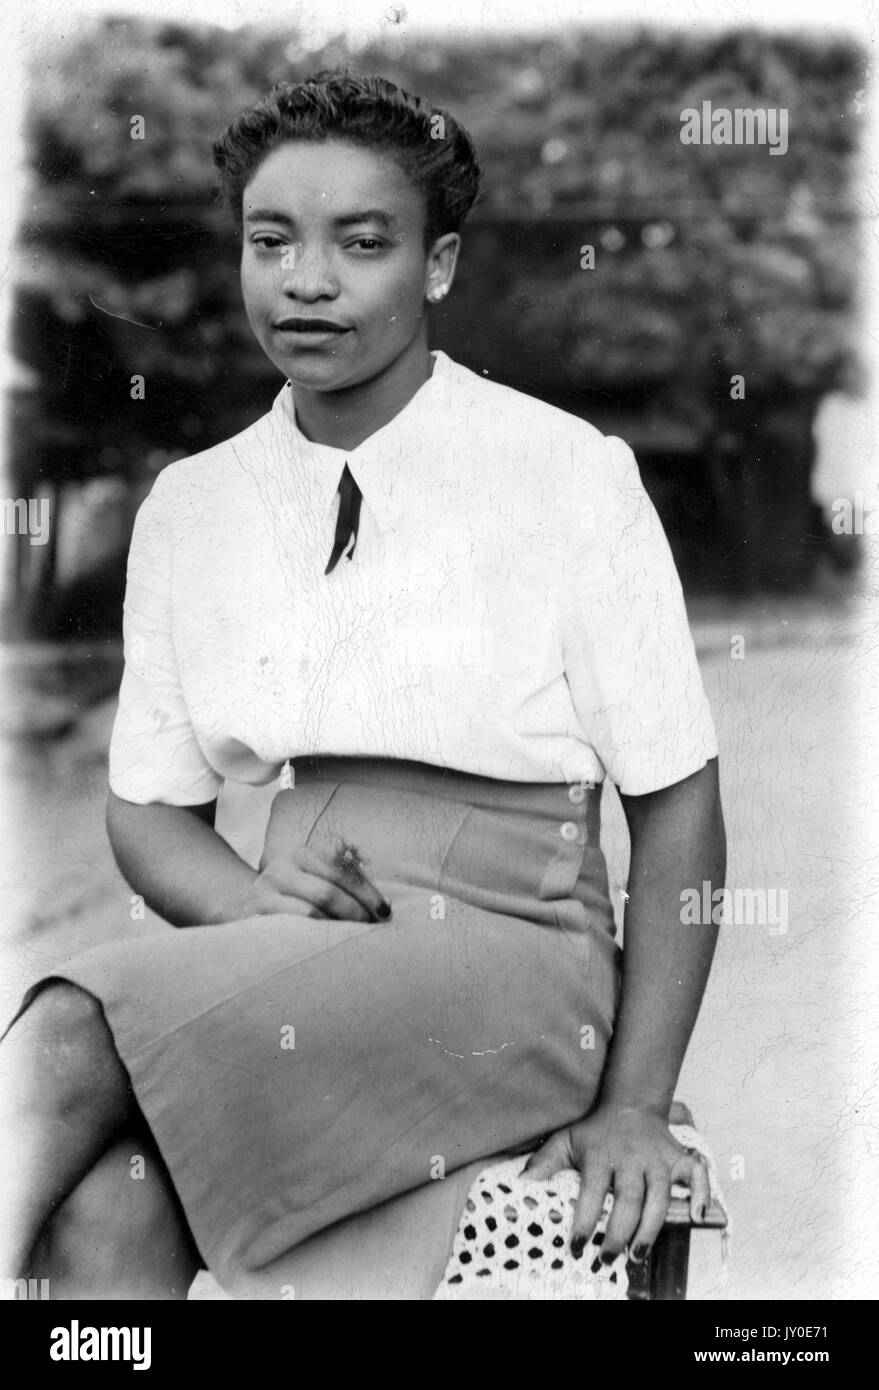 Portrait of an African American woman sitting on a bench outside with trees in the background, she is wearing a knee-length light colored skirt and a light colored blouse, her knees are crossed with one hand in her lap and the other resting on the bench, 1929. Stock Photo